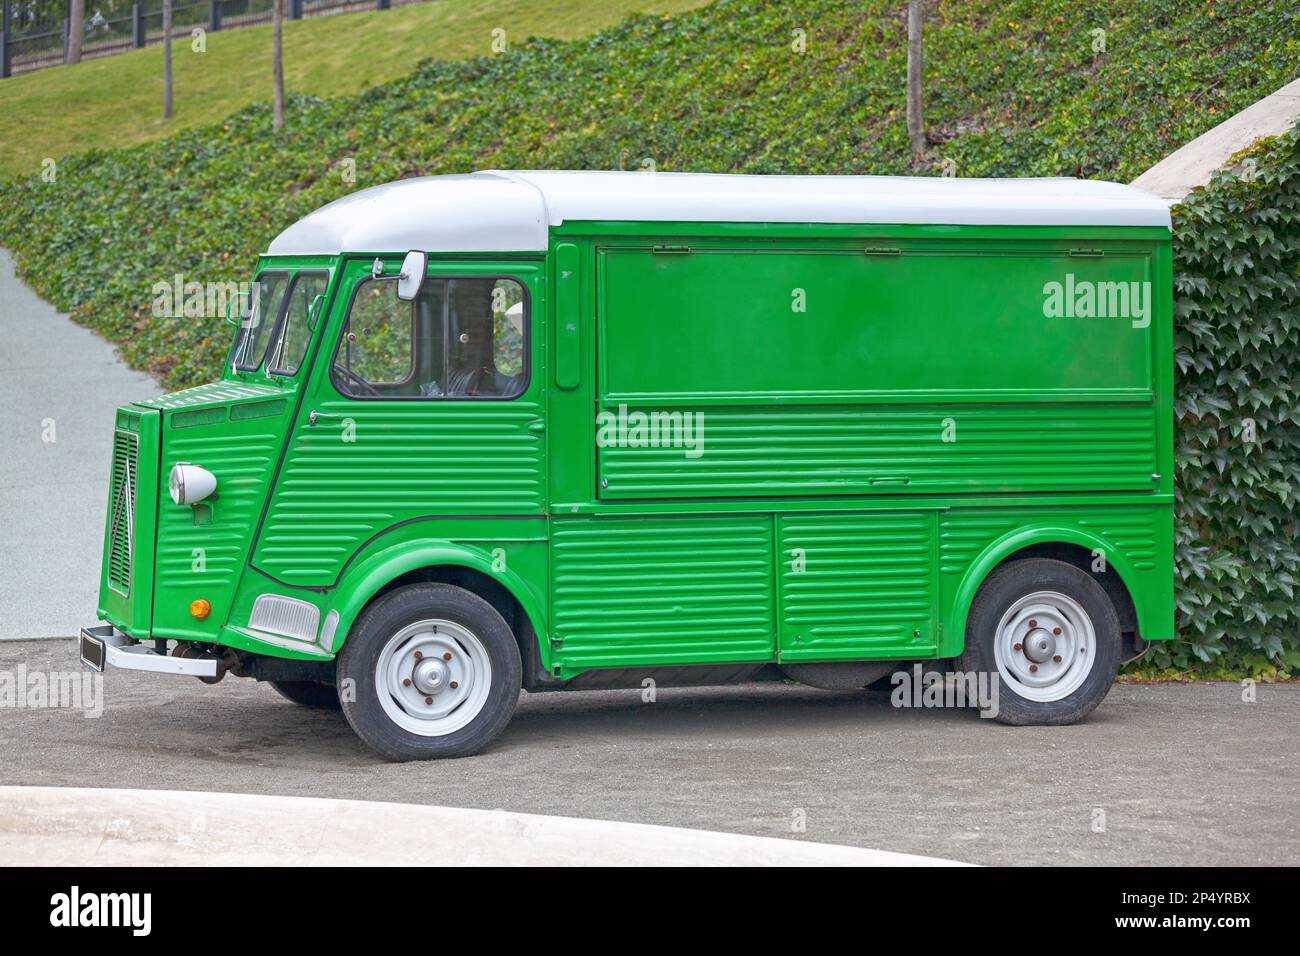 Paris, France - June 22 2018: Left side view of a Green Citroen H Van pre-1969 model with semi-circular rear wings and suicide doors. Stock Photo